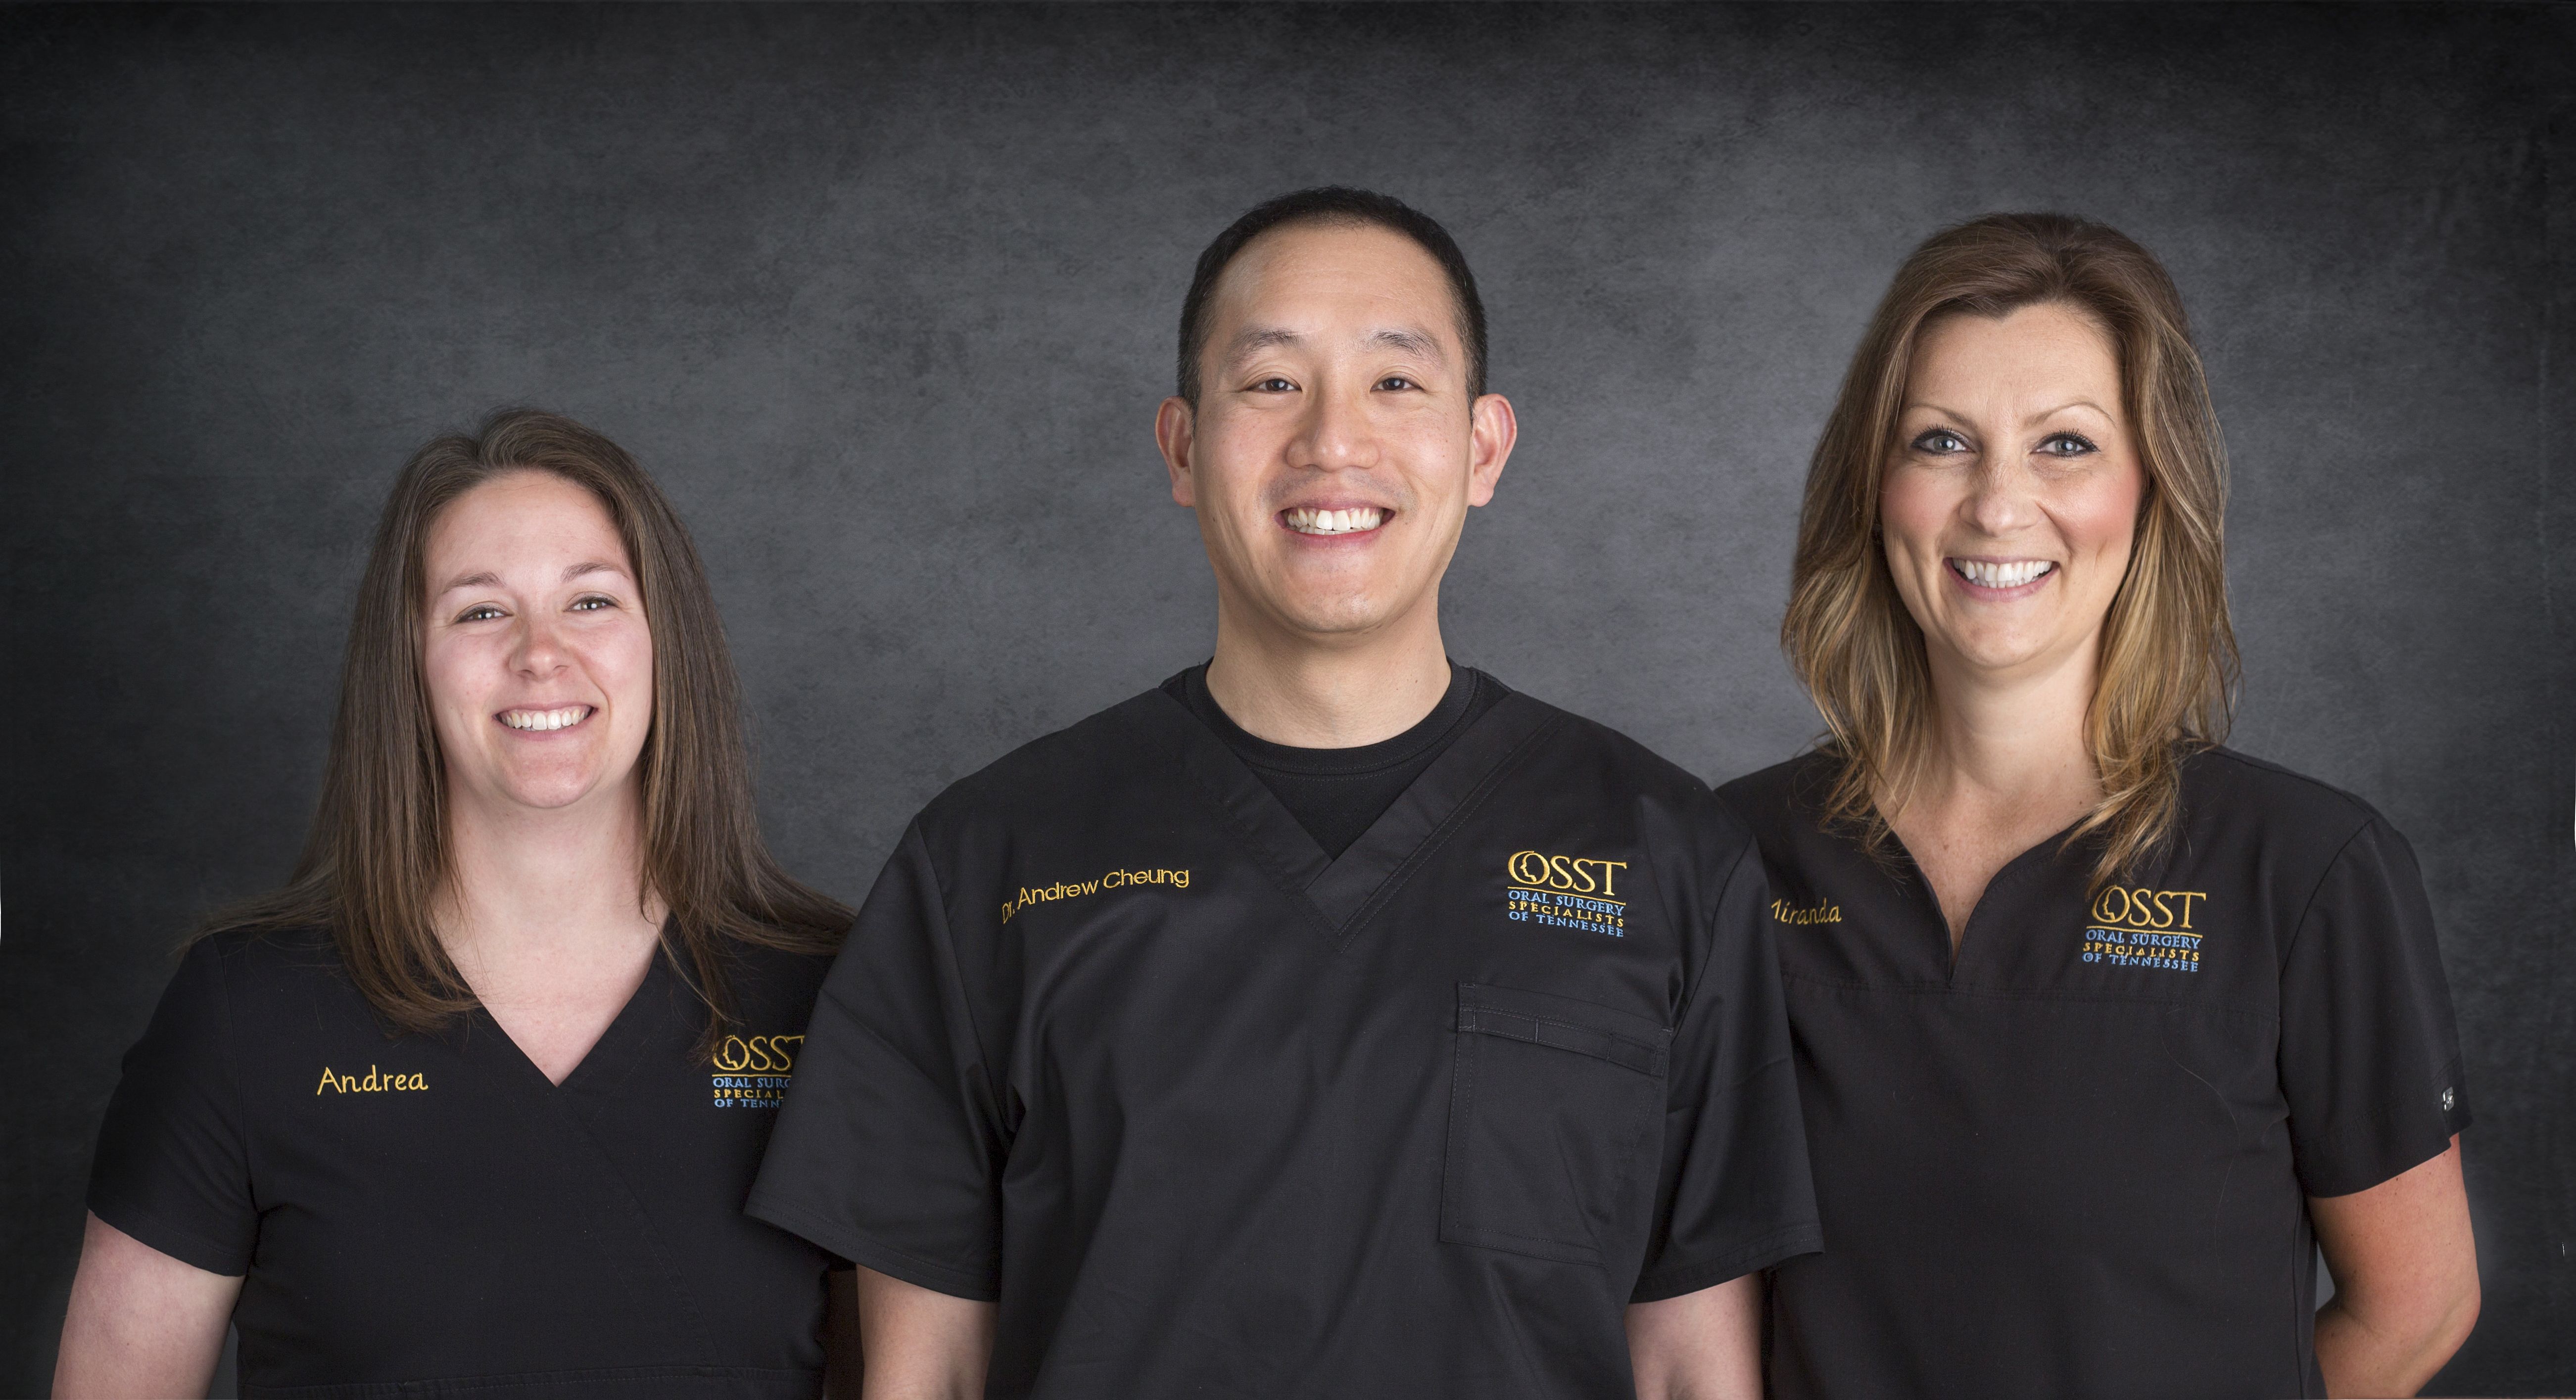 Staff of Oral Surgery Specialists of Tennessee | Oak Ridge, TN